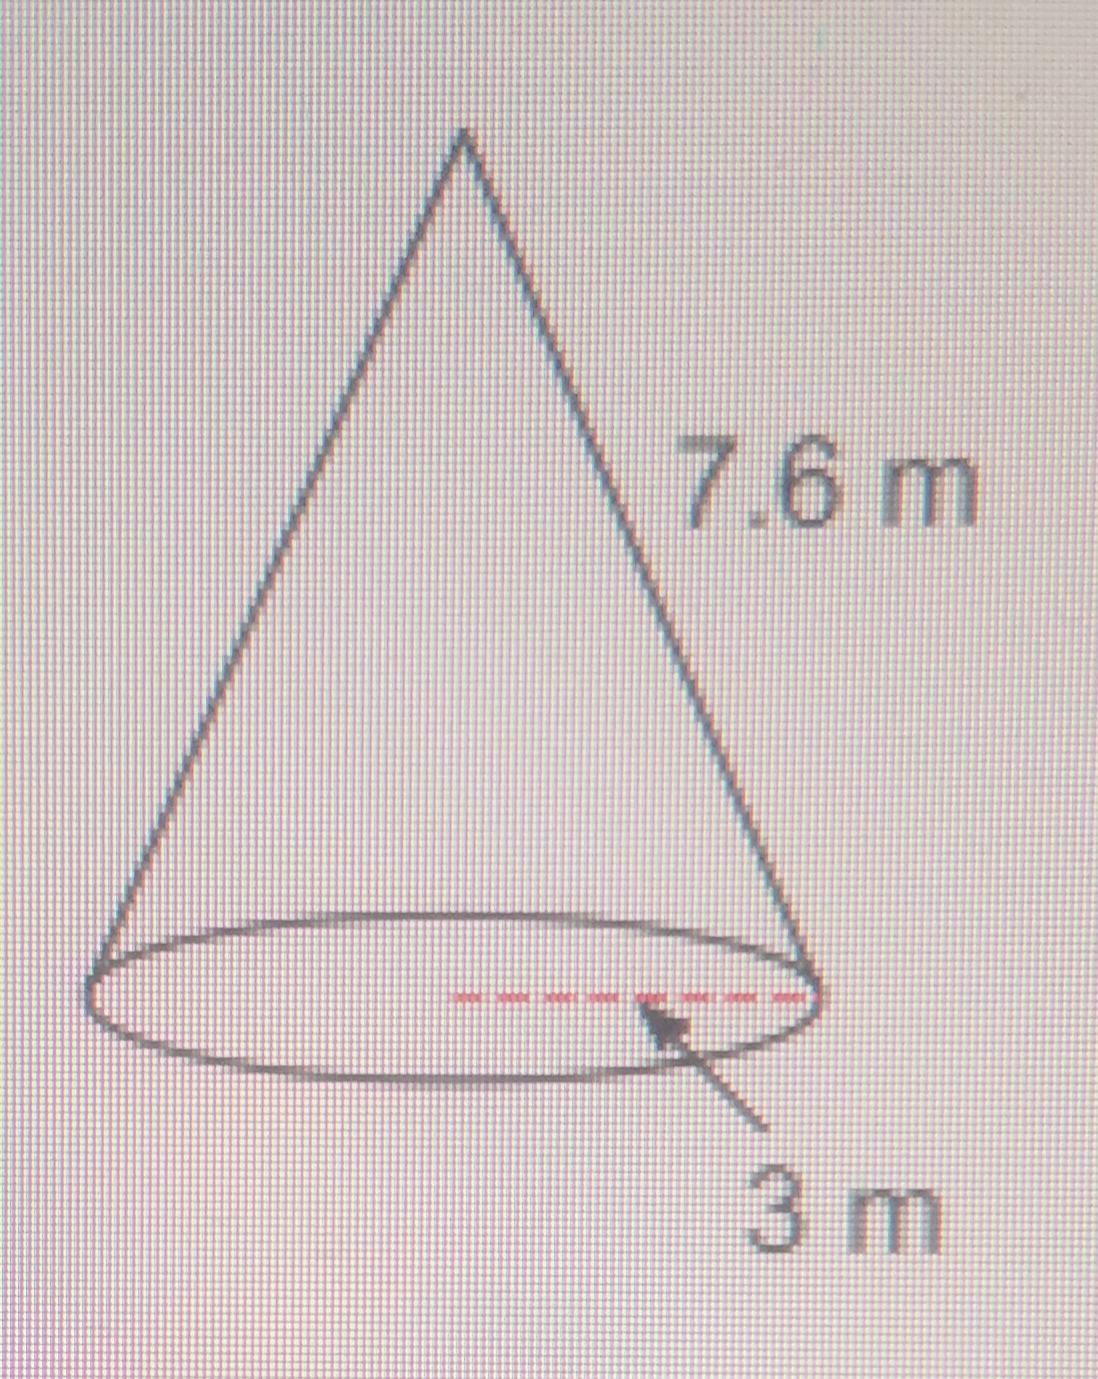 I Need Help To Find An Surface Area! I Will Include A Full Photo.